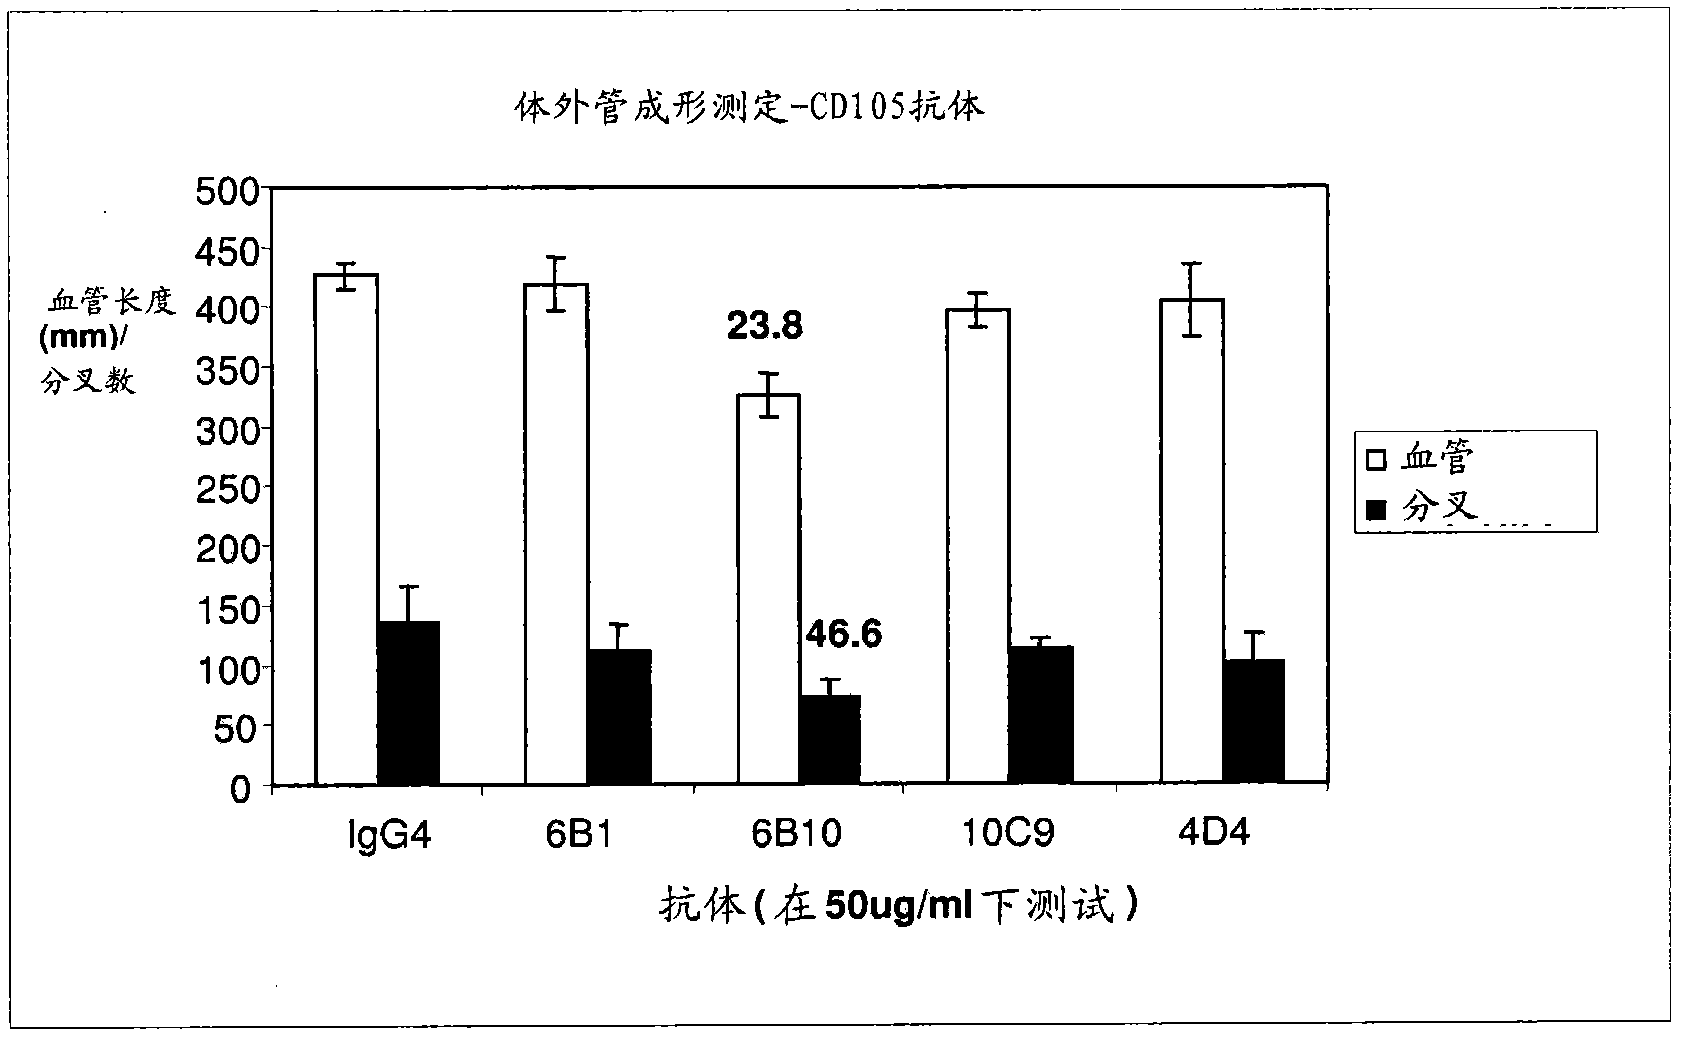 Targeted binding agents directed to cd105 and uses thereof